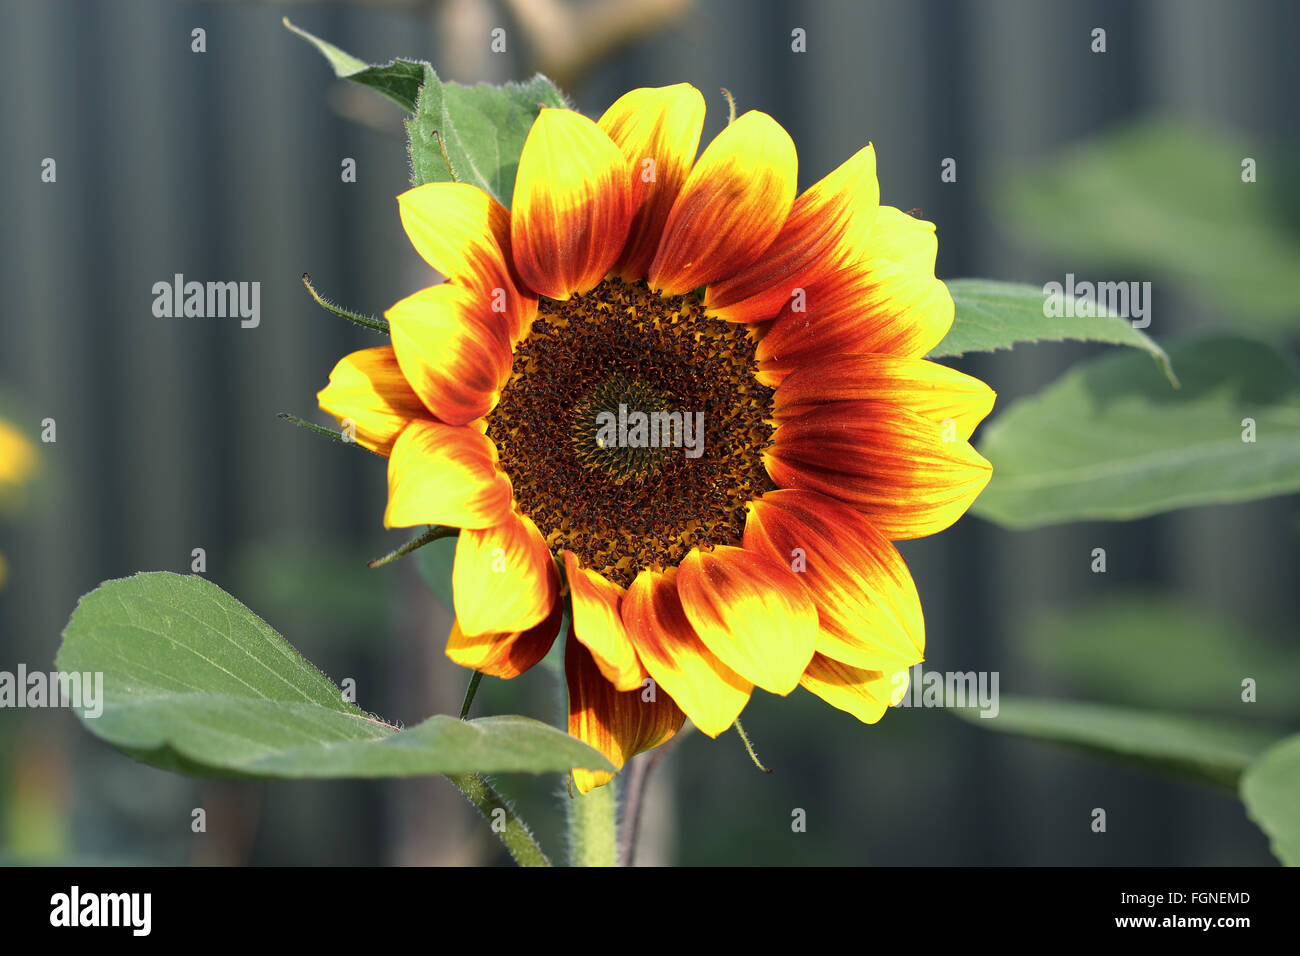 Helianthus annuus or known as Golden Prominence F1 sunflower Stock Photo